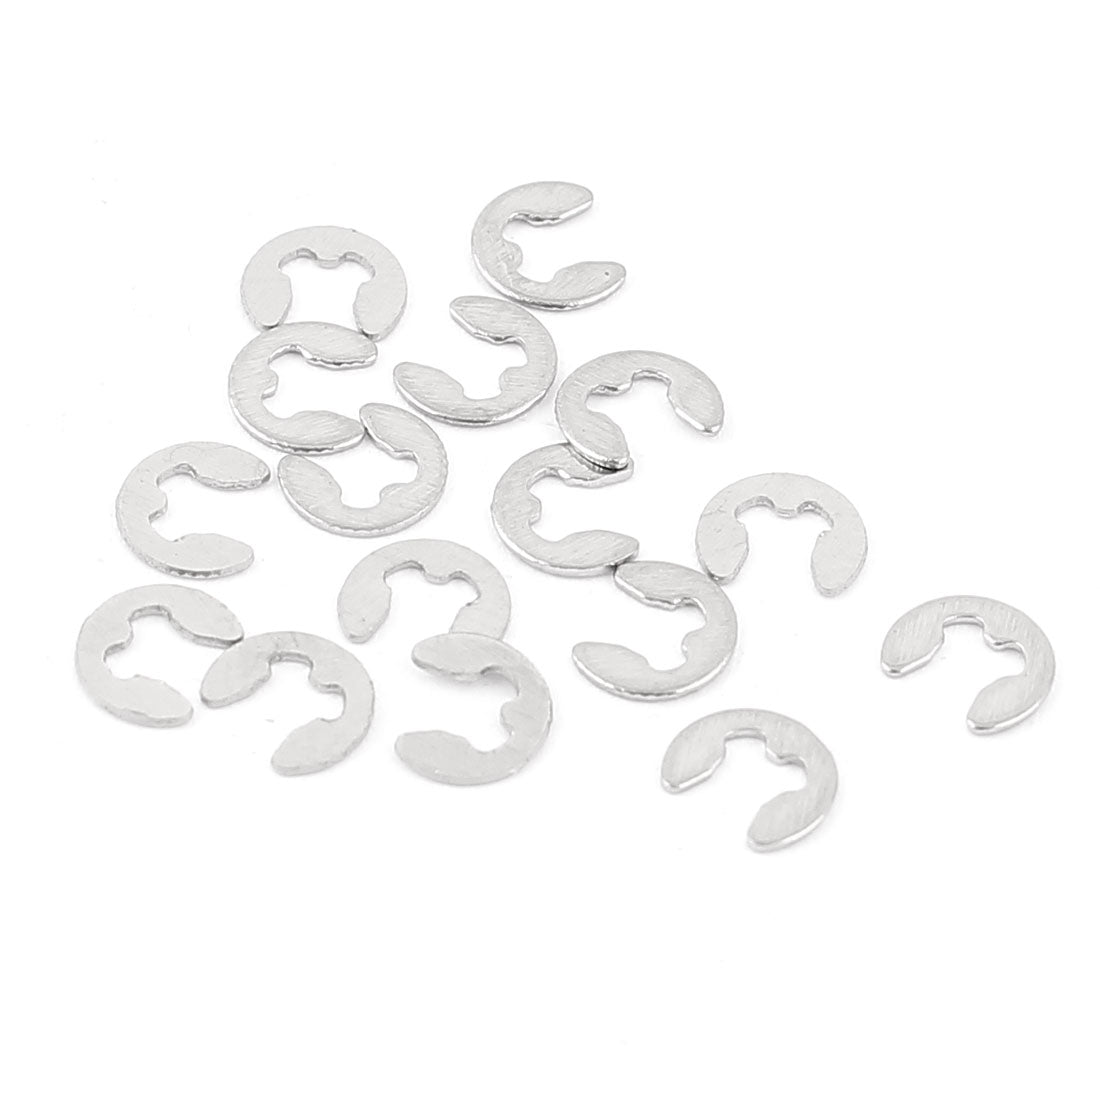 uxcell Uxcell 10pcs 304 Stainless Steel Fastener External Retaining Ring E-Clip Circlip 2mm